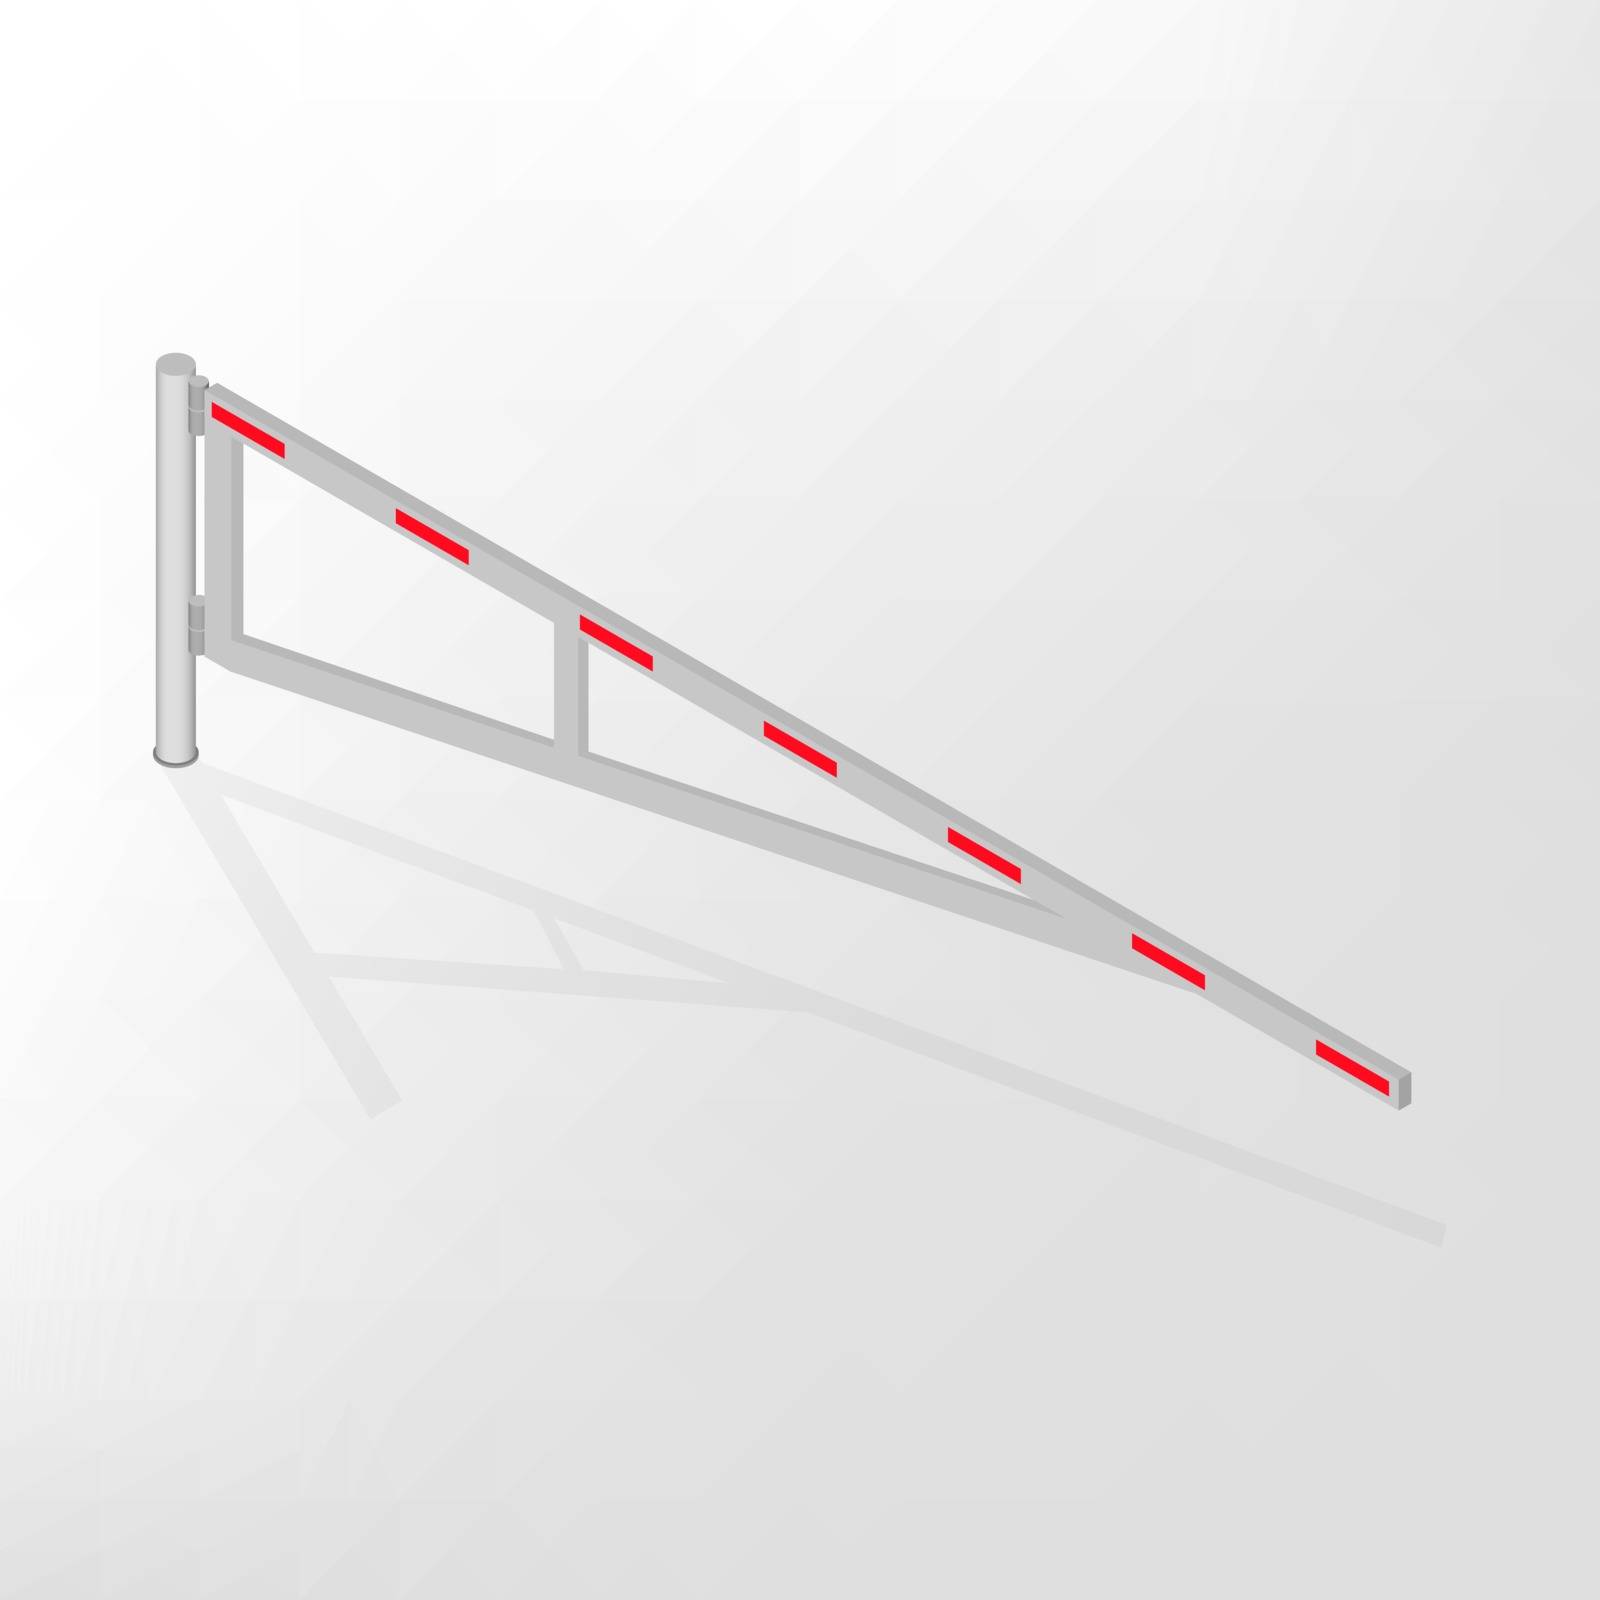 Mechanical barrier isolated on white background. Crossbar for opening and closing the way at level crossings. Flat 3D isometric style, vector illustration.